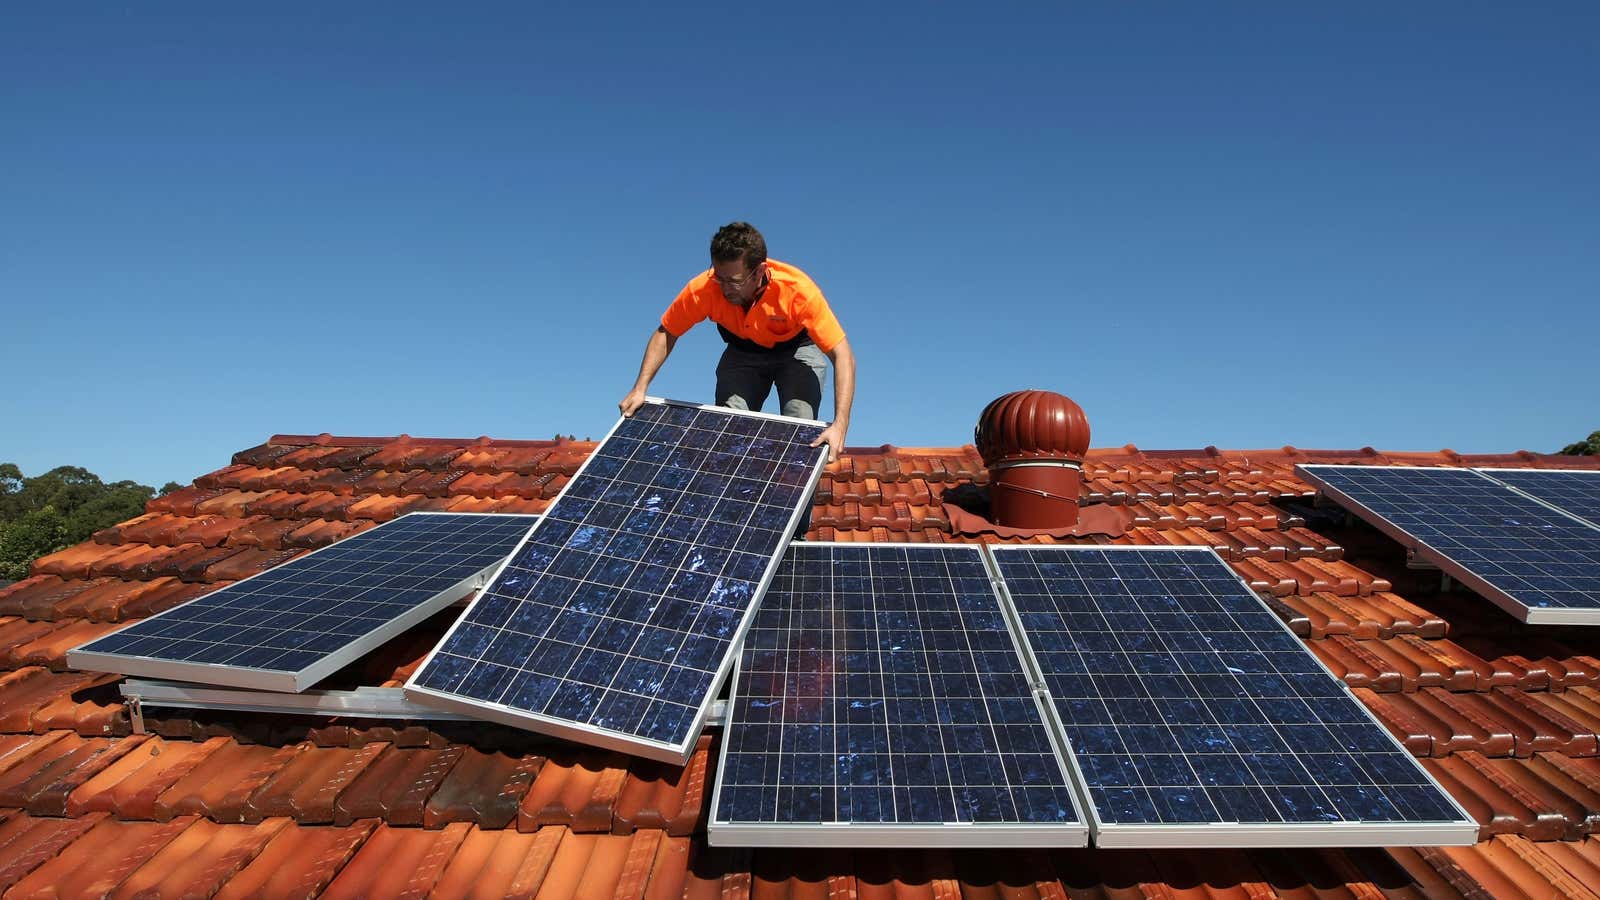 High electric bills and blackouts tend to make homeowners take a more serious look at solar.